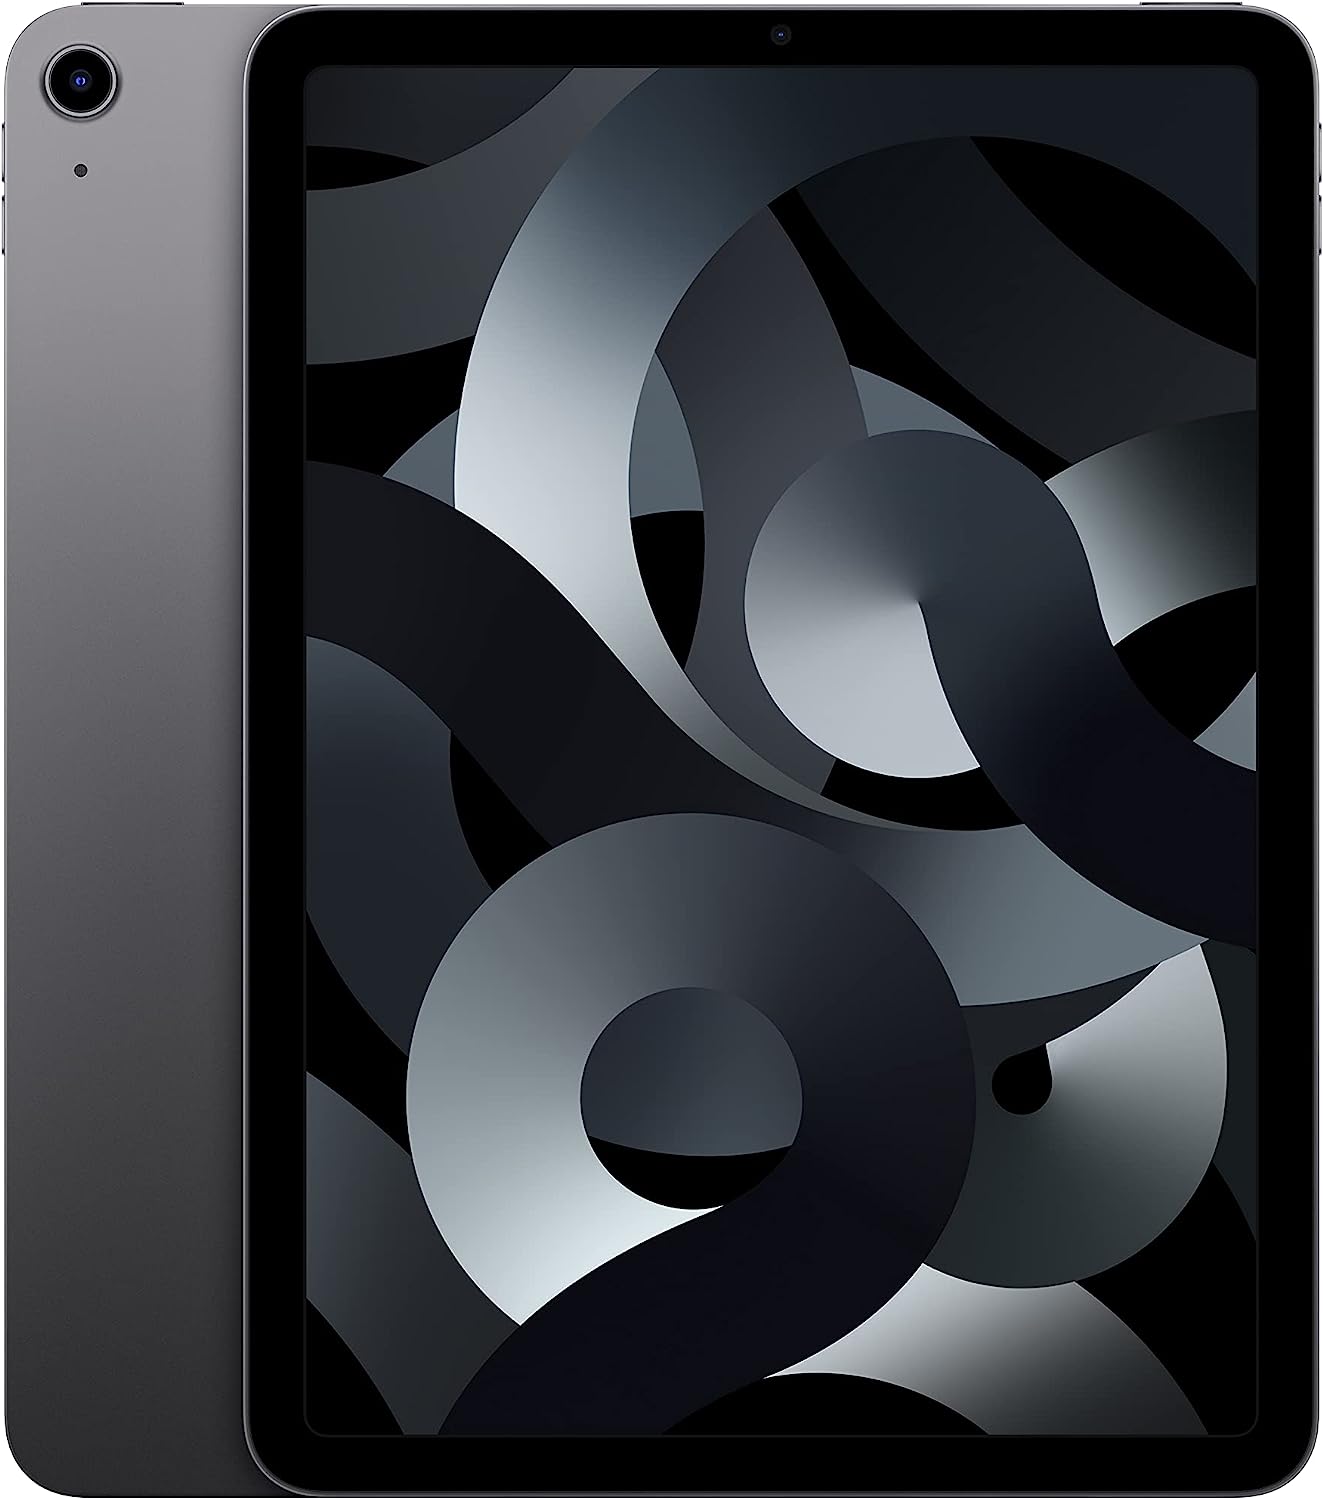 Apple iPad Air (5th Generation): with M1 chip, 10.9-inch Liquid Retina Display, 64GB, Wi-Fi 6, 12MP front/12MP Back Camera, Touch ID, All-Day Battery Life – Space Gray - $449.00